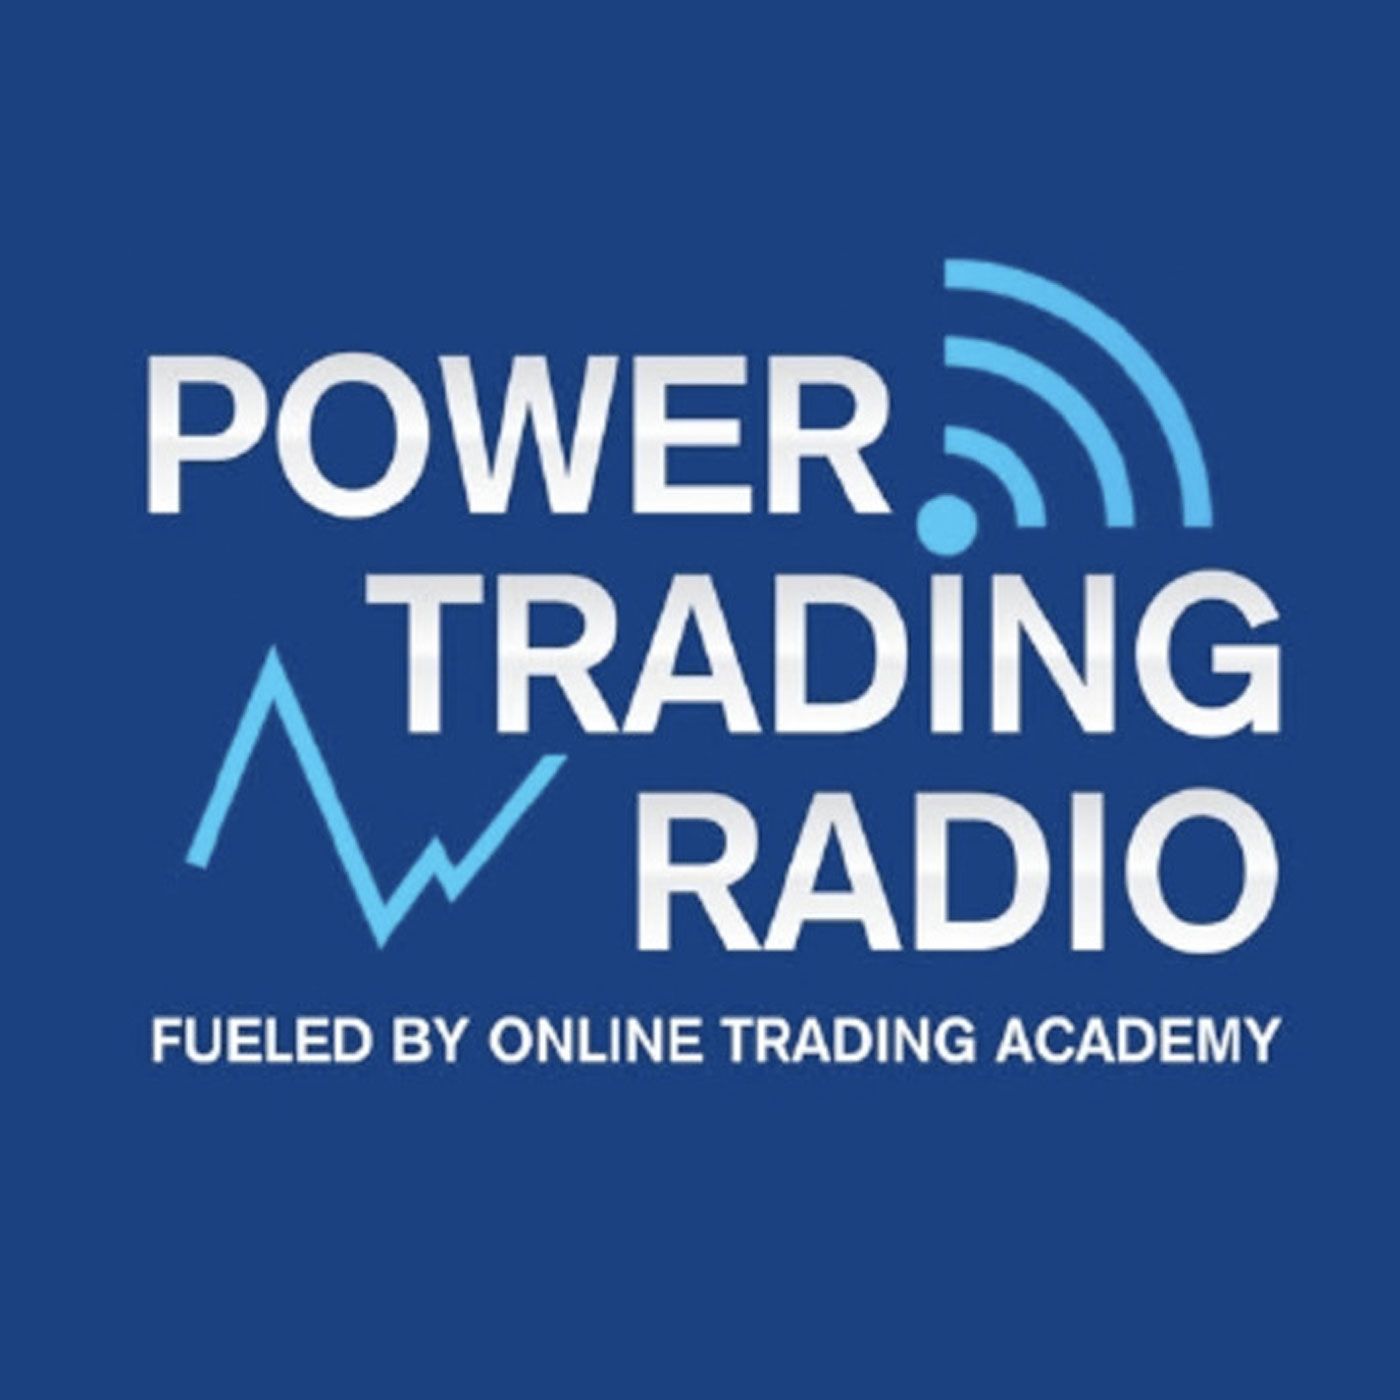 ONLINE TRADING ACADEMY 4-23-18 6PM&11PM